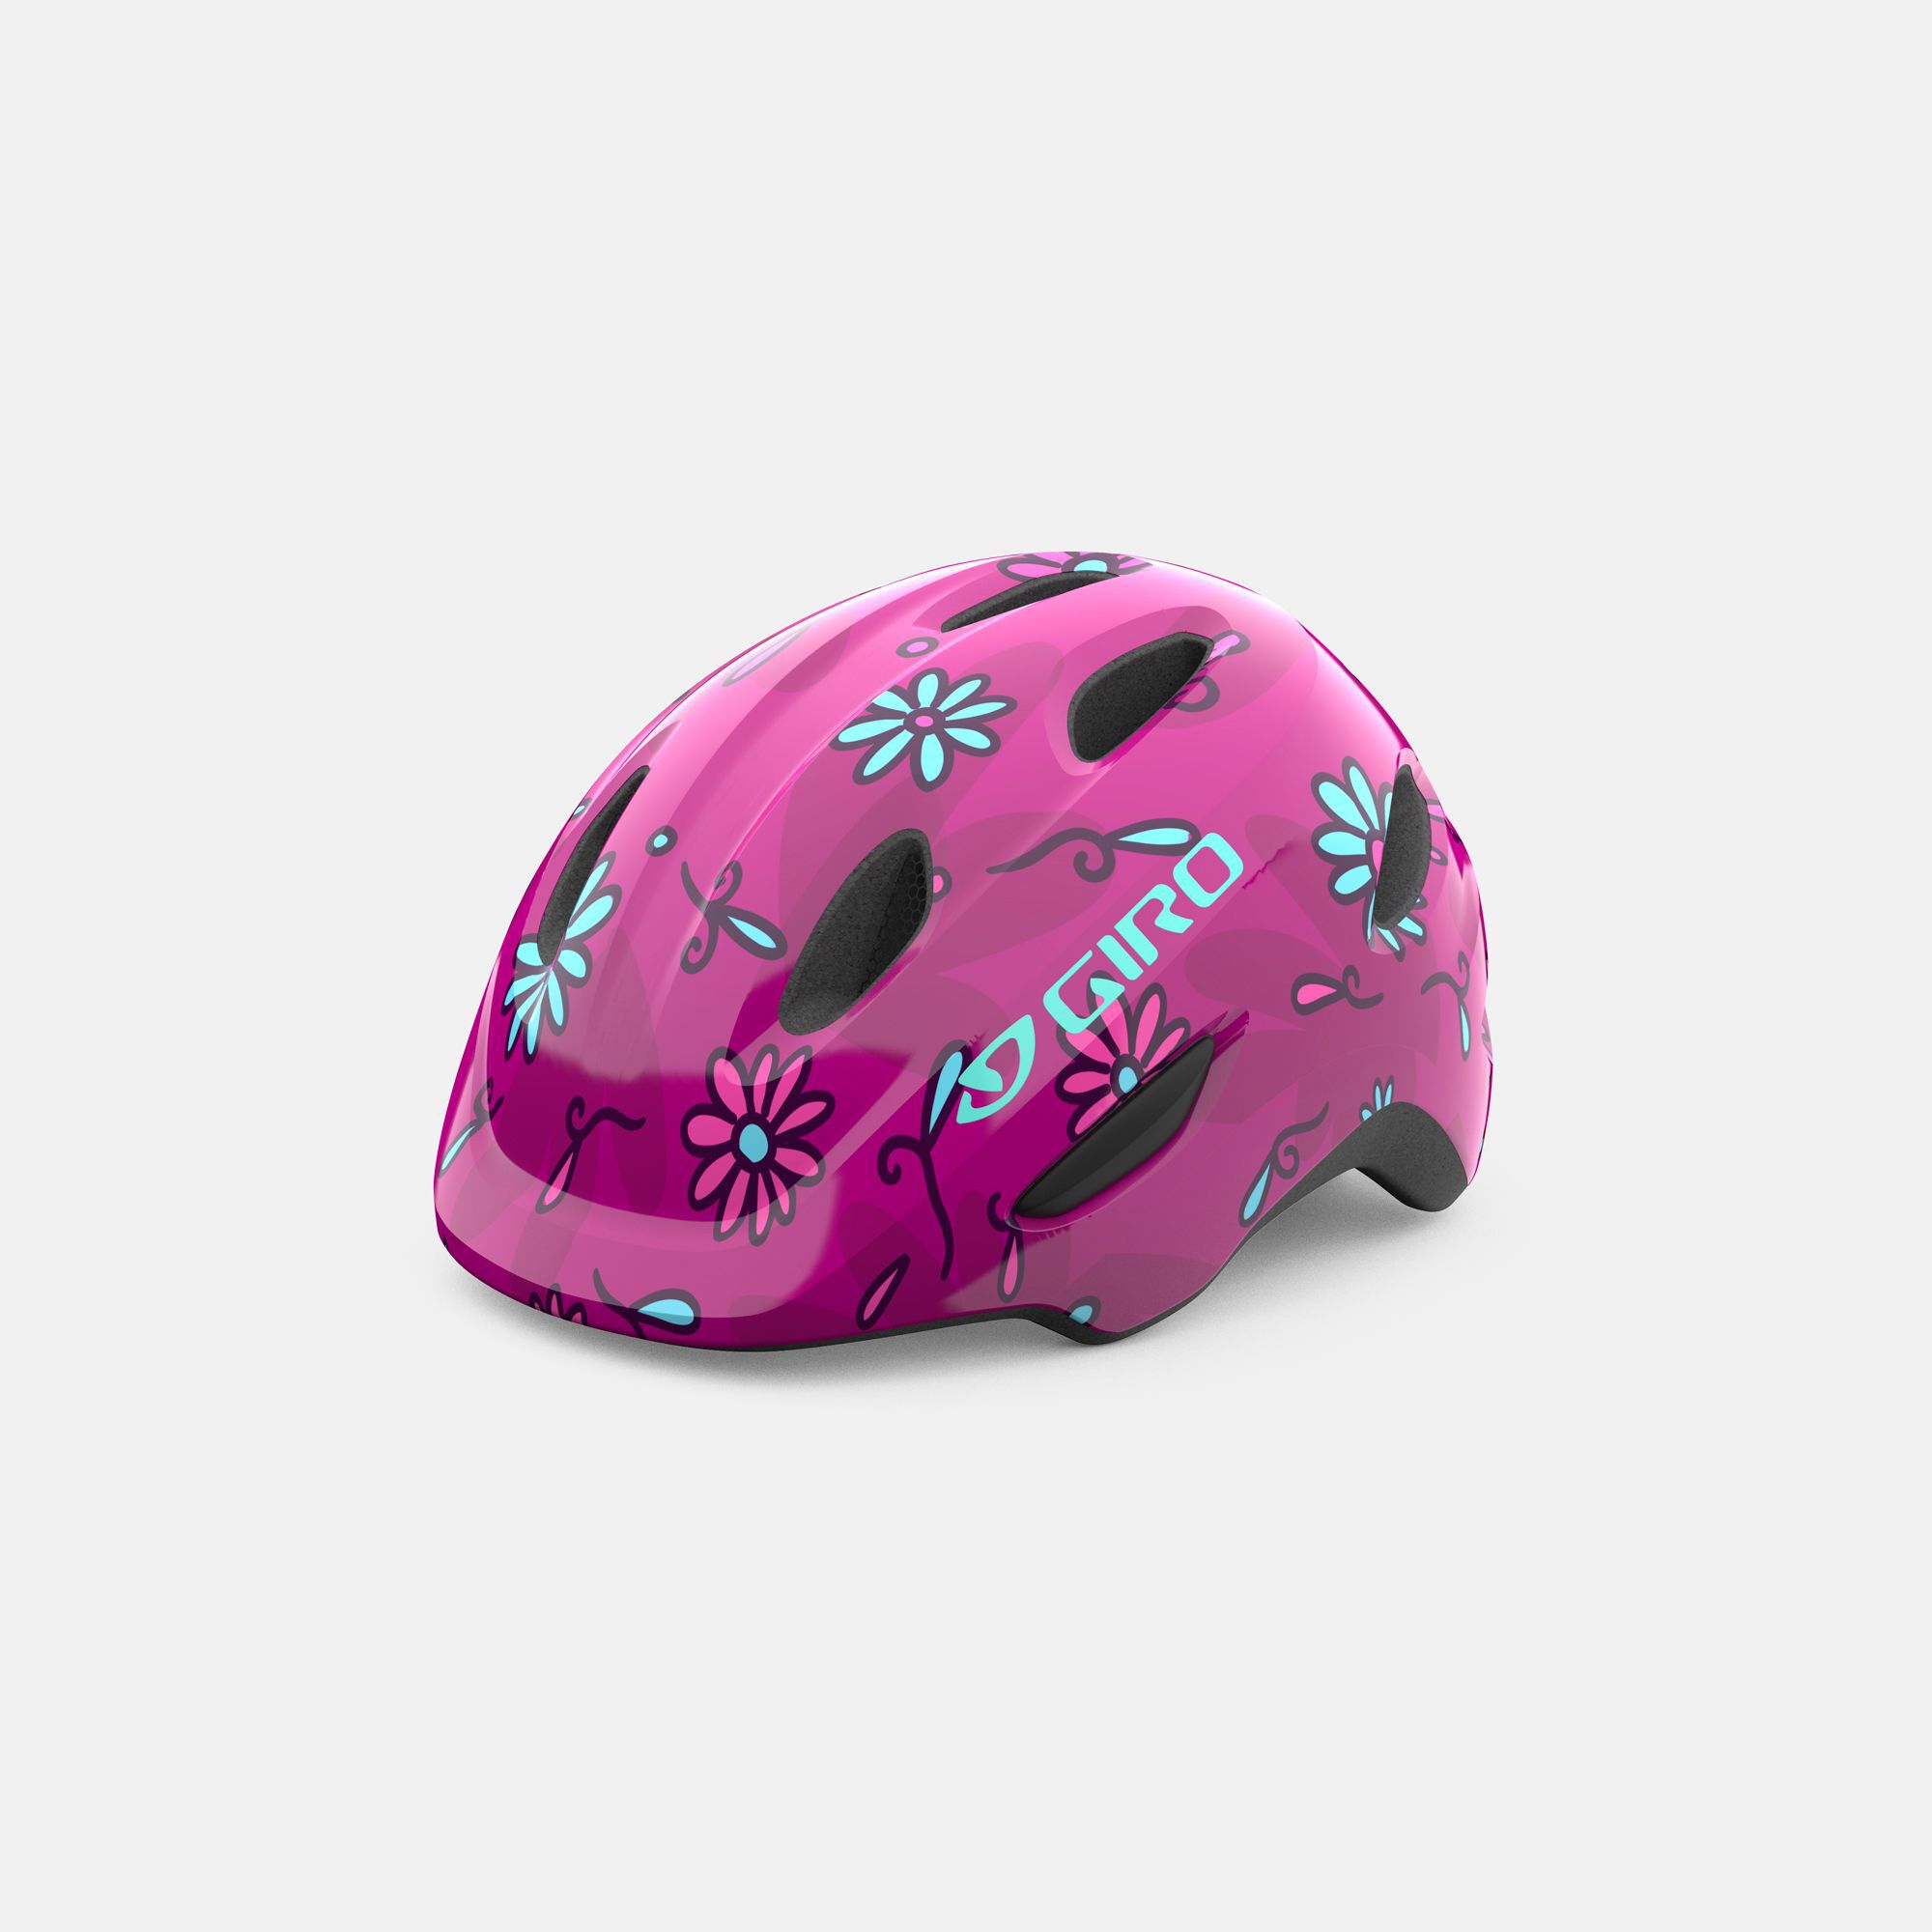 Extra Small Details about   Giro Child Scamp Youth Bike Safety Helmet Bright Red 